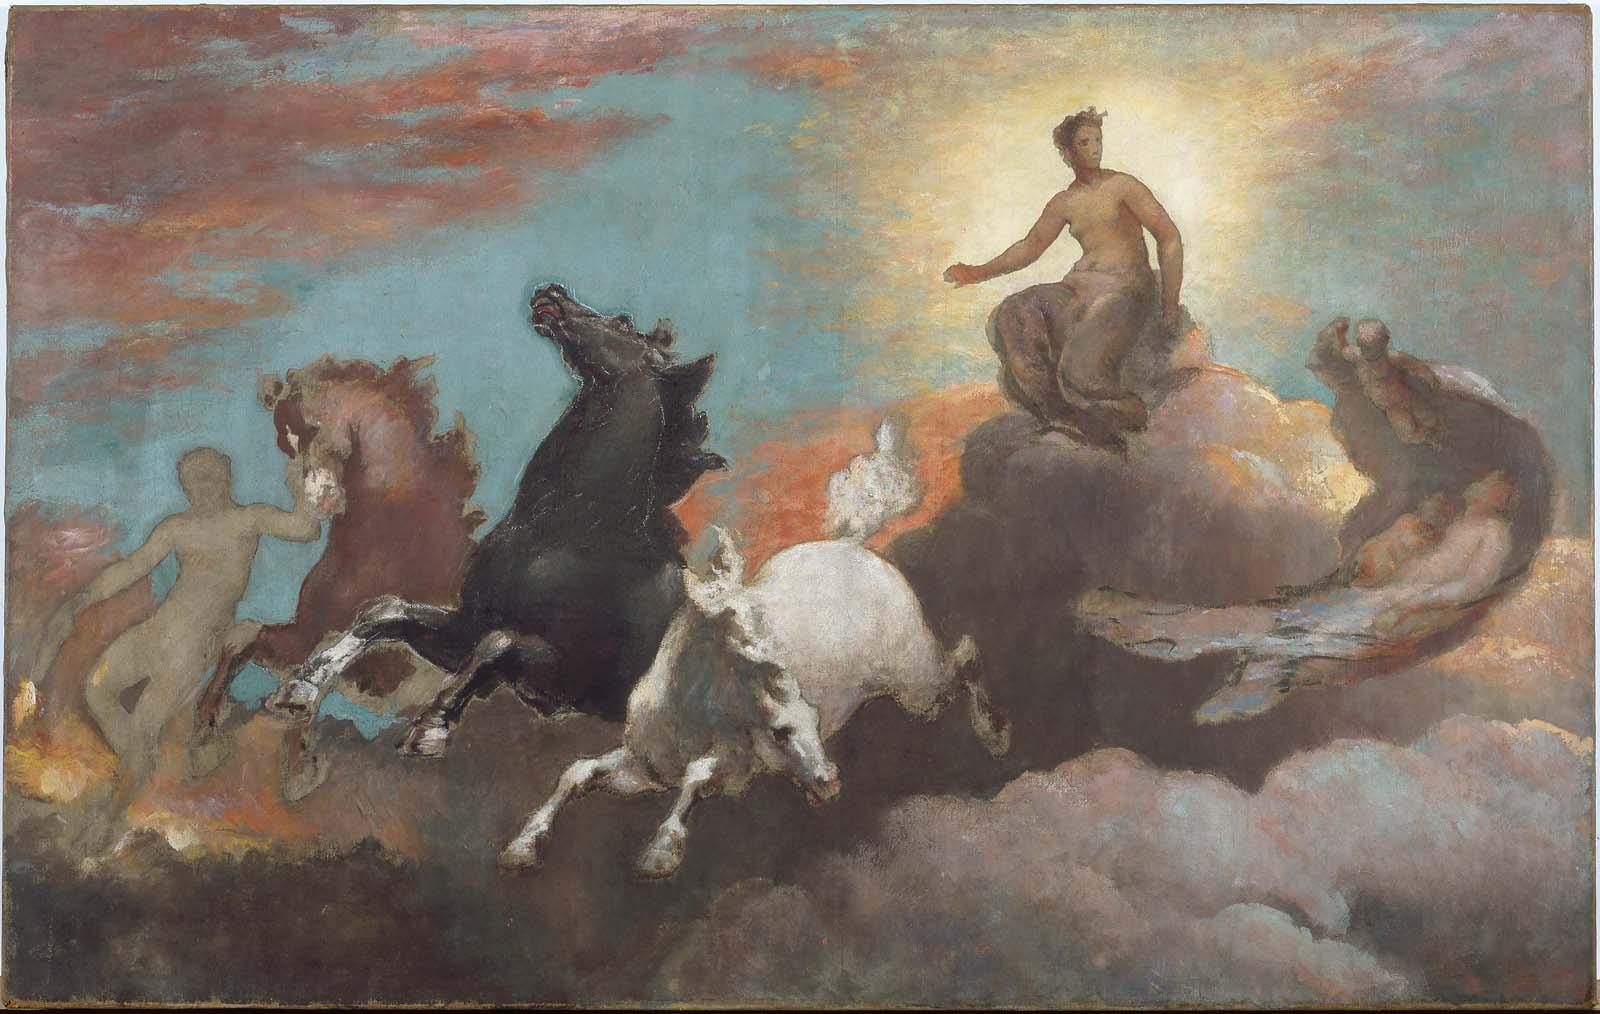 A painting of three horses, four adult human figures, and two cherubs set in the sky amidst clouds and a rising sun